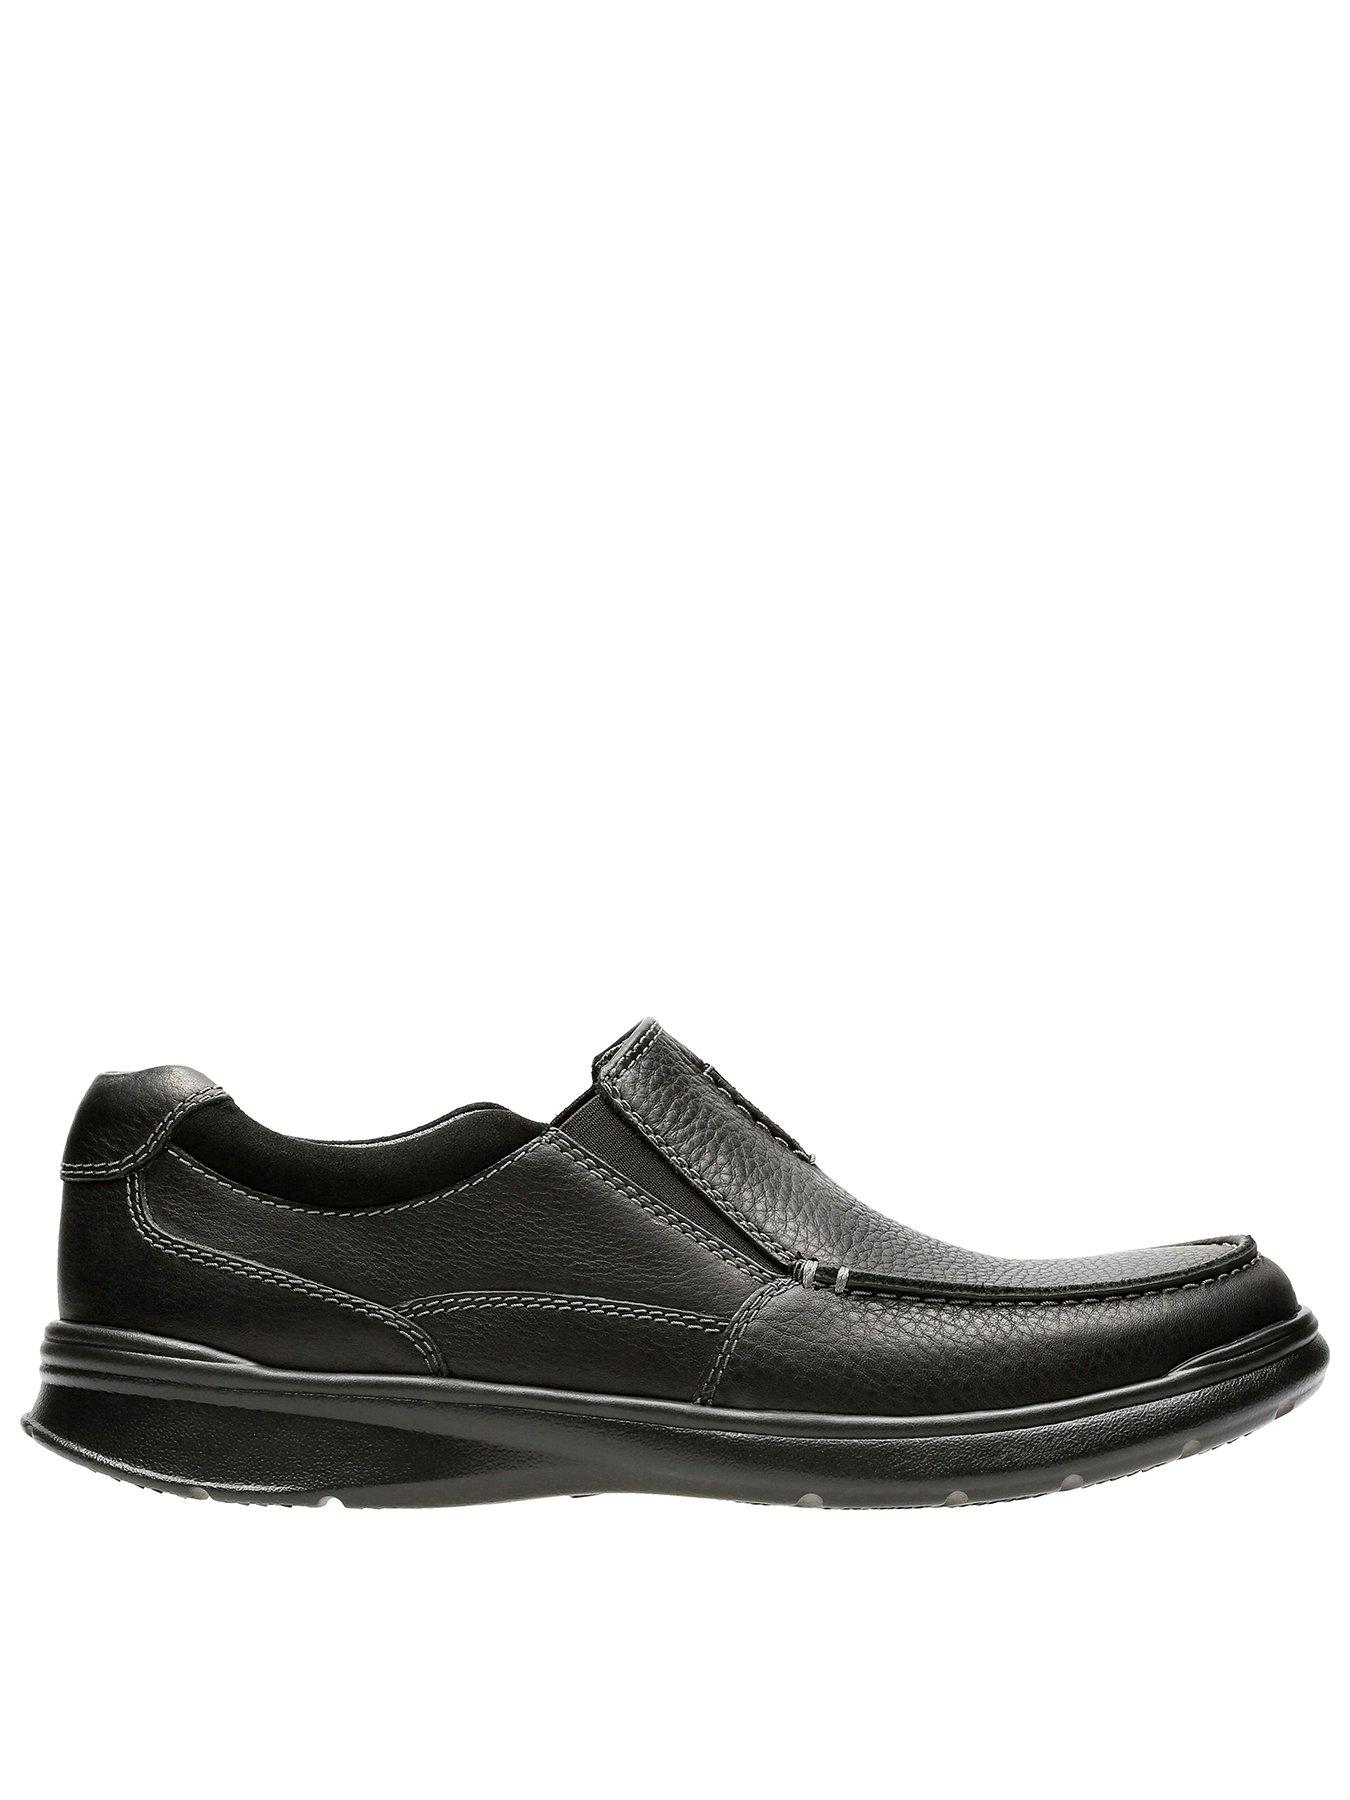 Clarks Cotrell Slip On Shoes - Black | Very